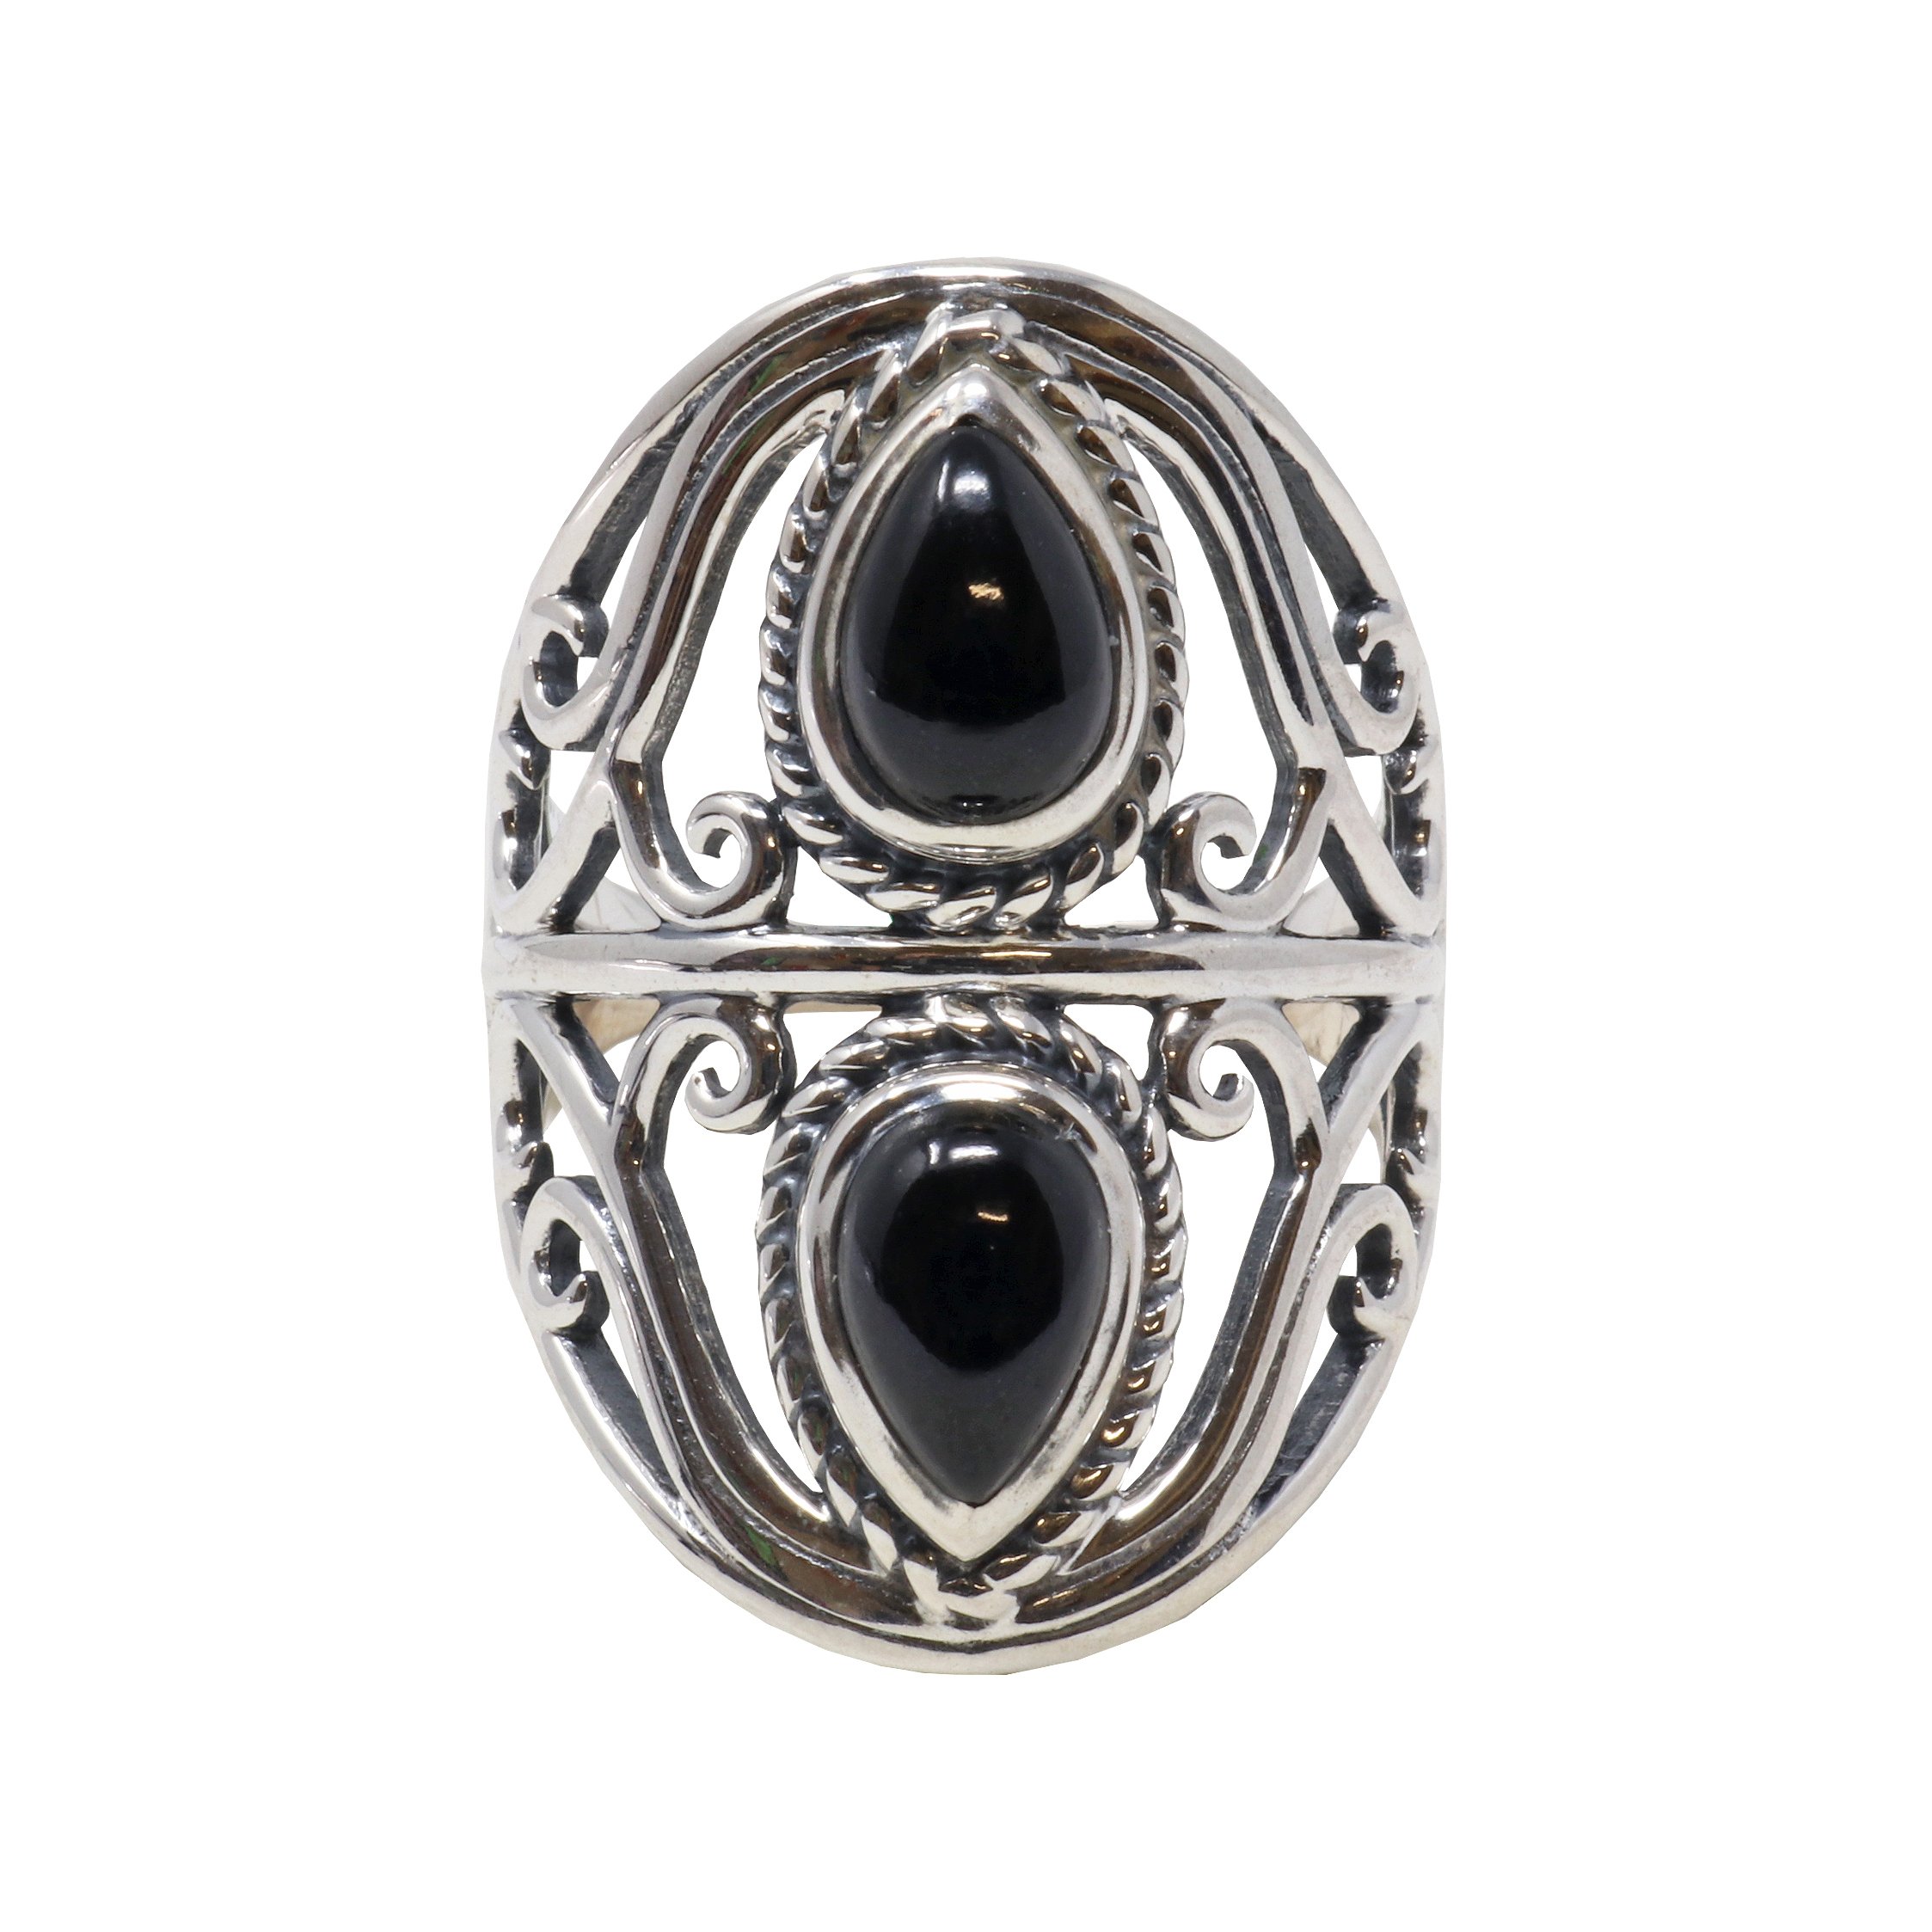 Black Onyx Ring Size 8 - 2 Pears